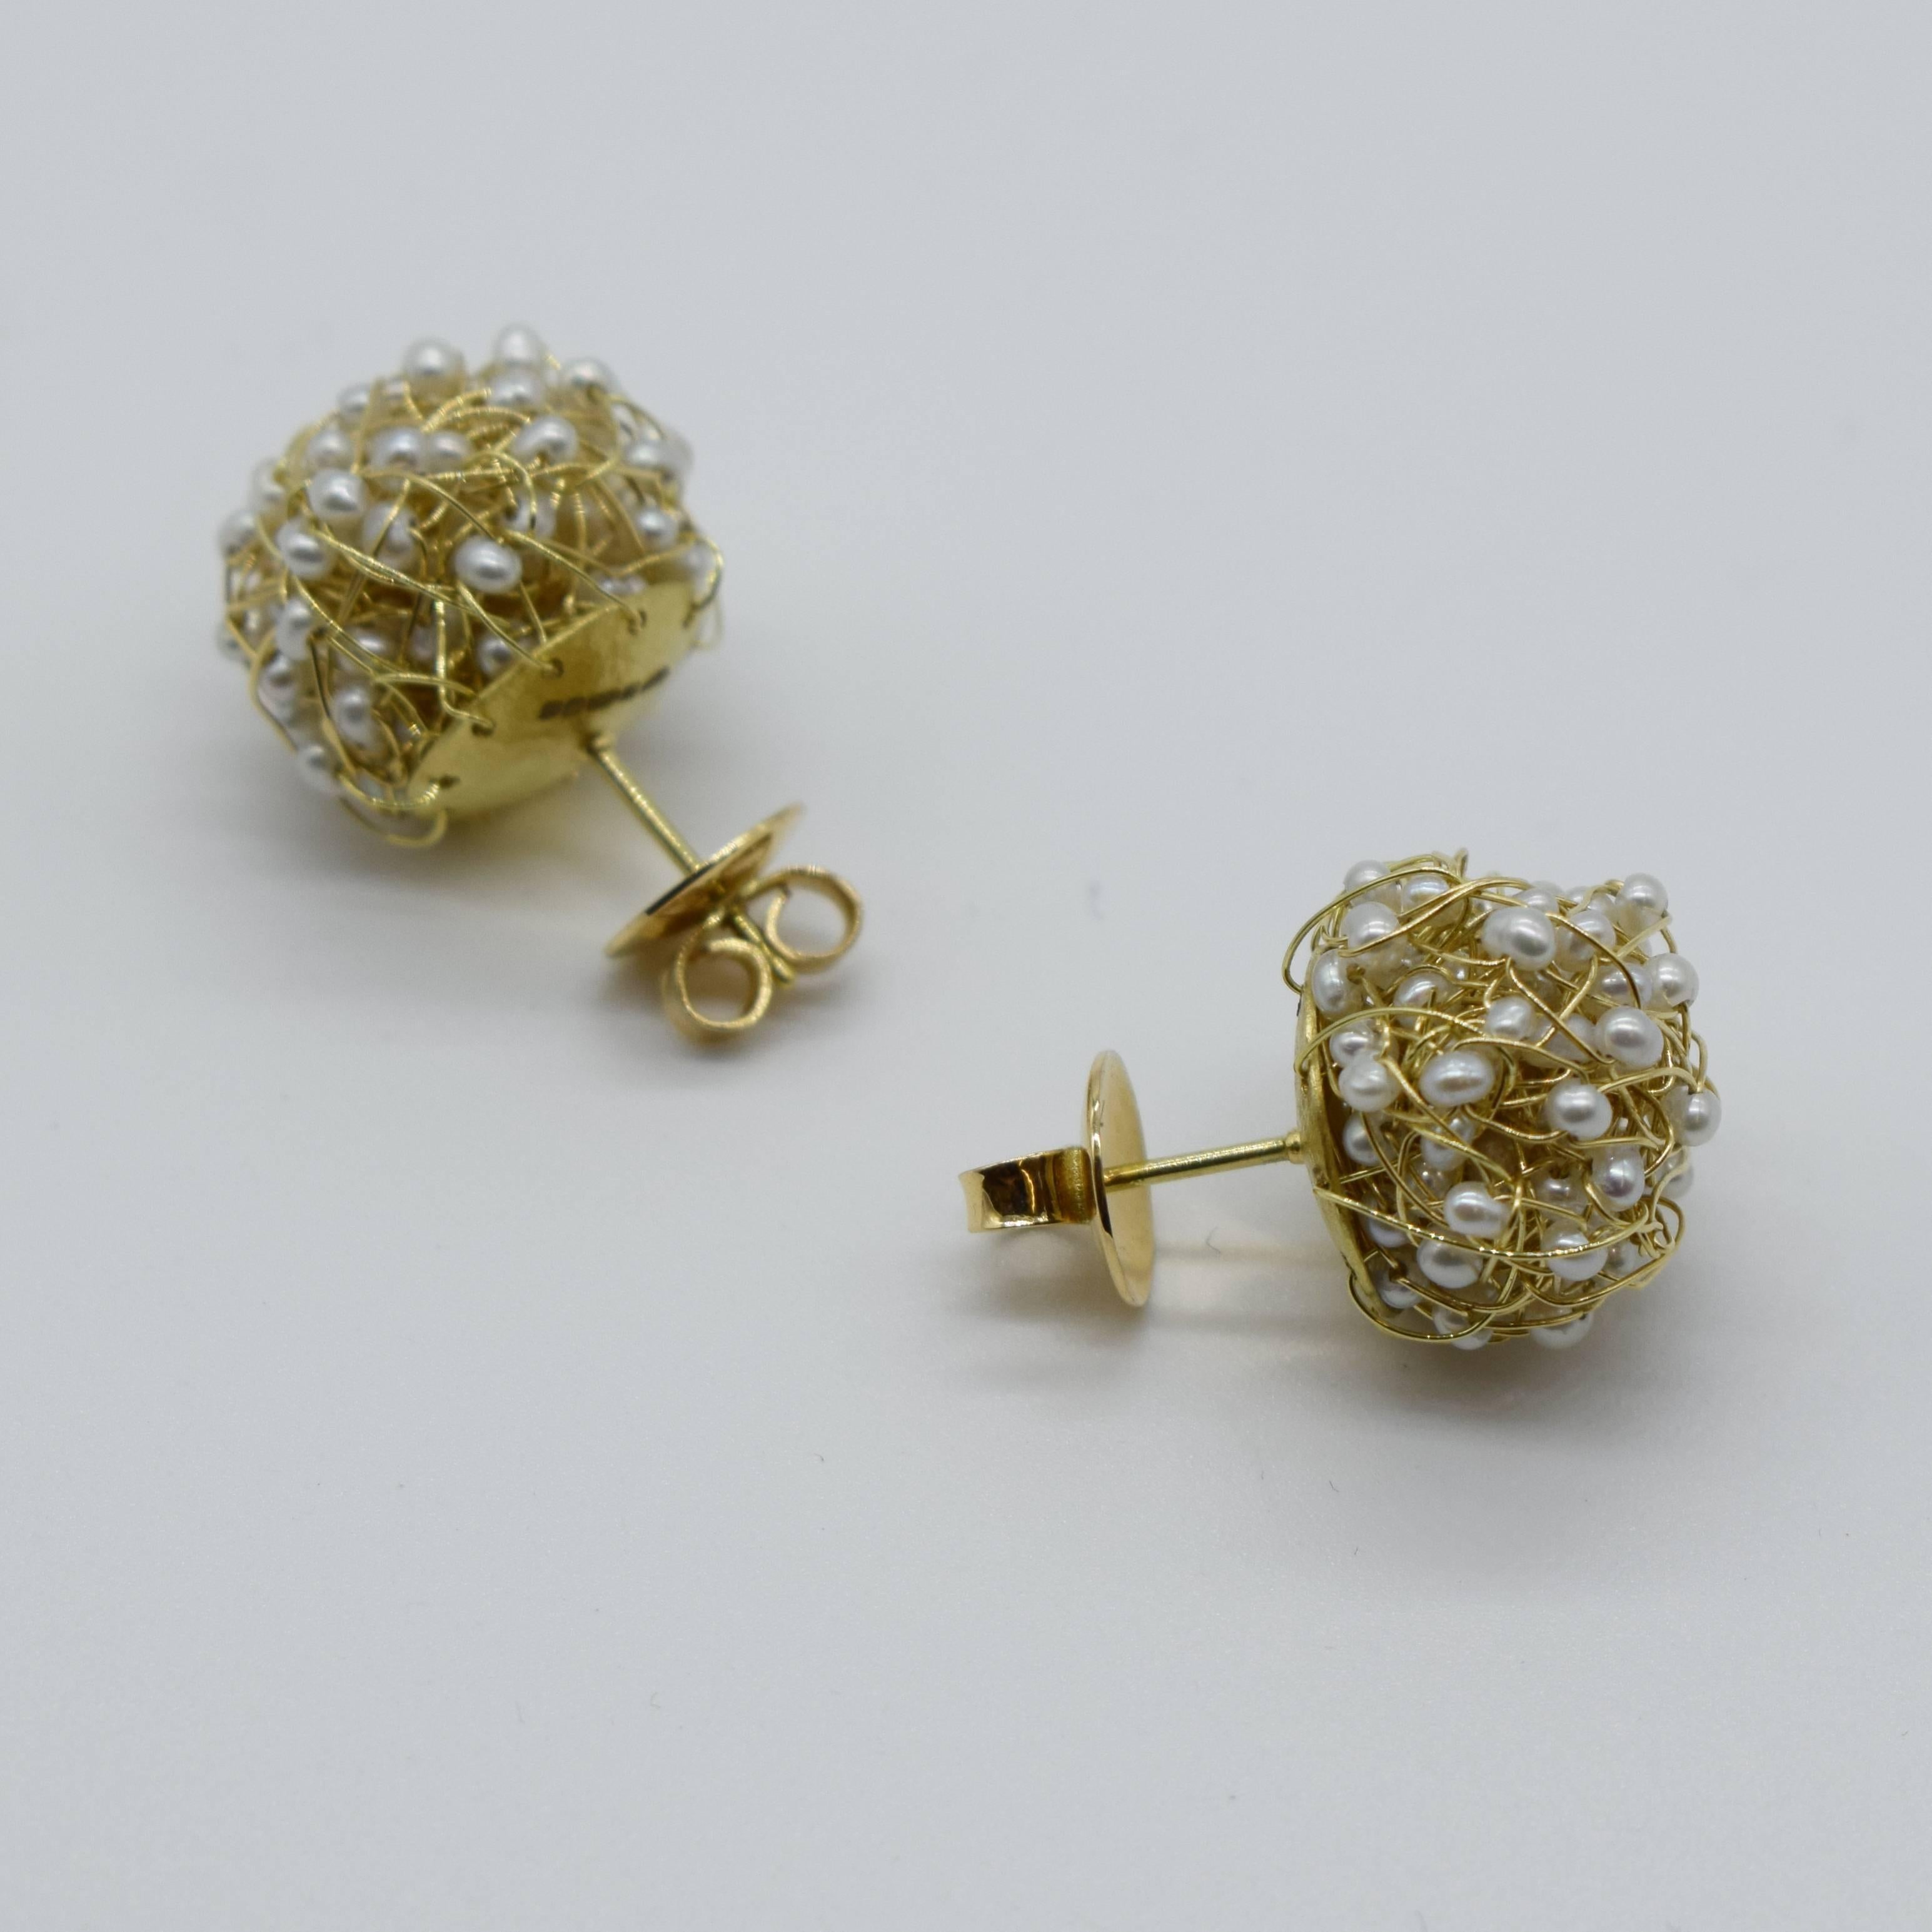 Contemporary Kayo Saito 18 Karat Gold Pearl Cluster Stud Earrings, Mist Collection For Sale